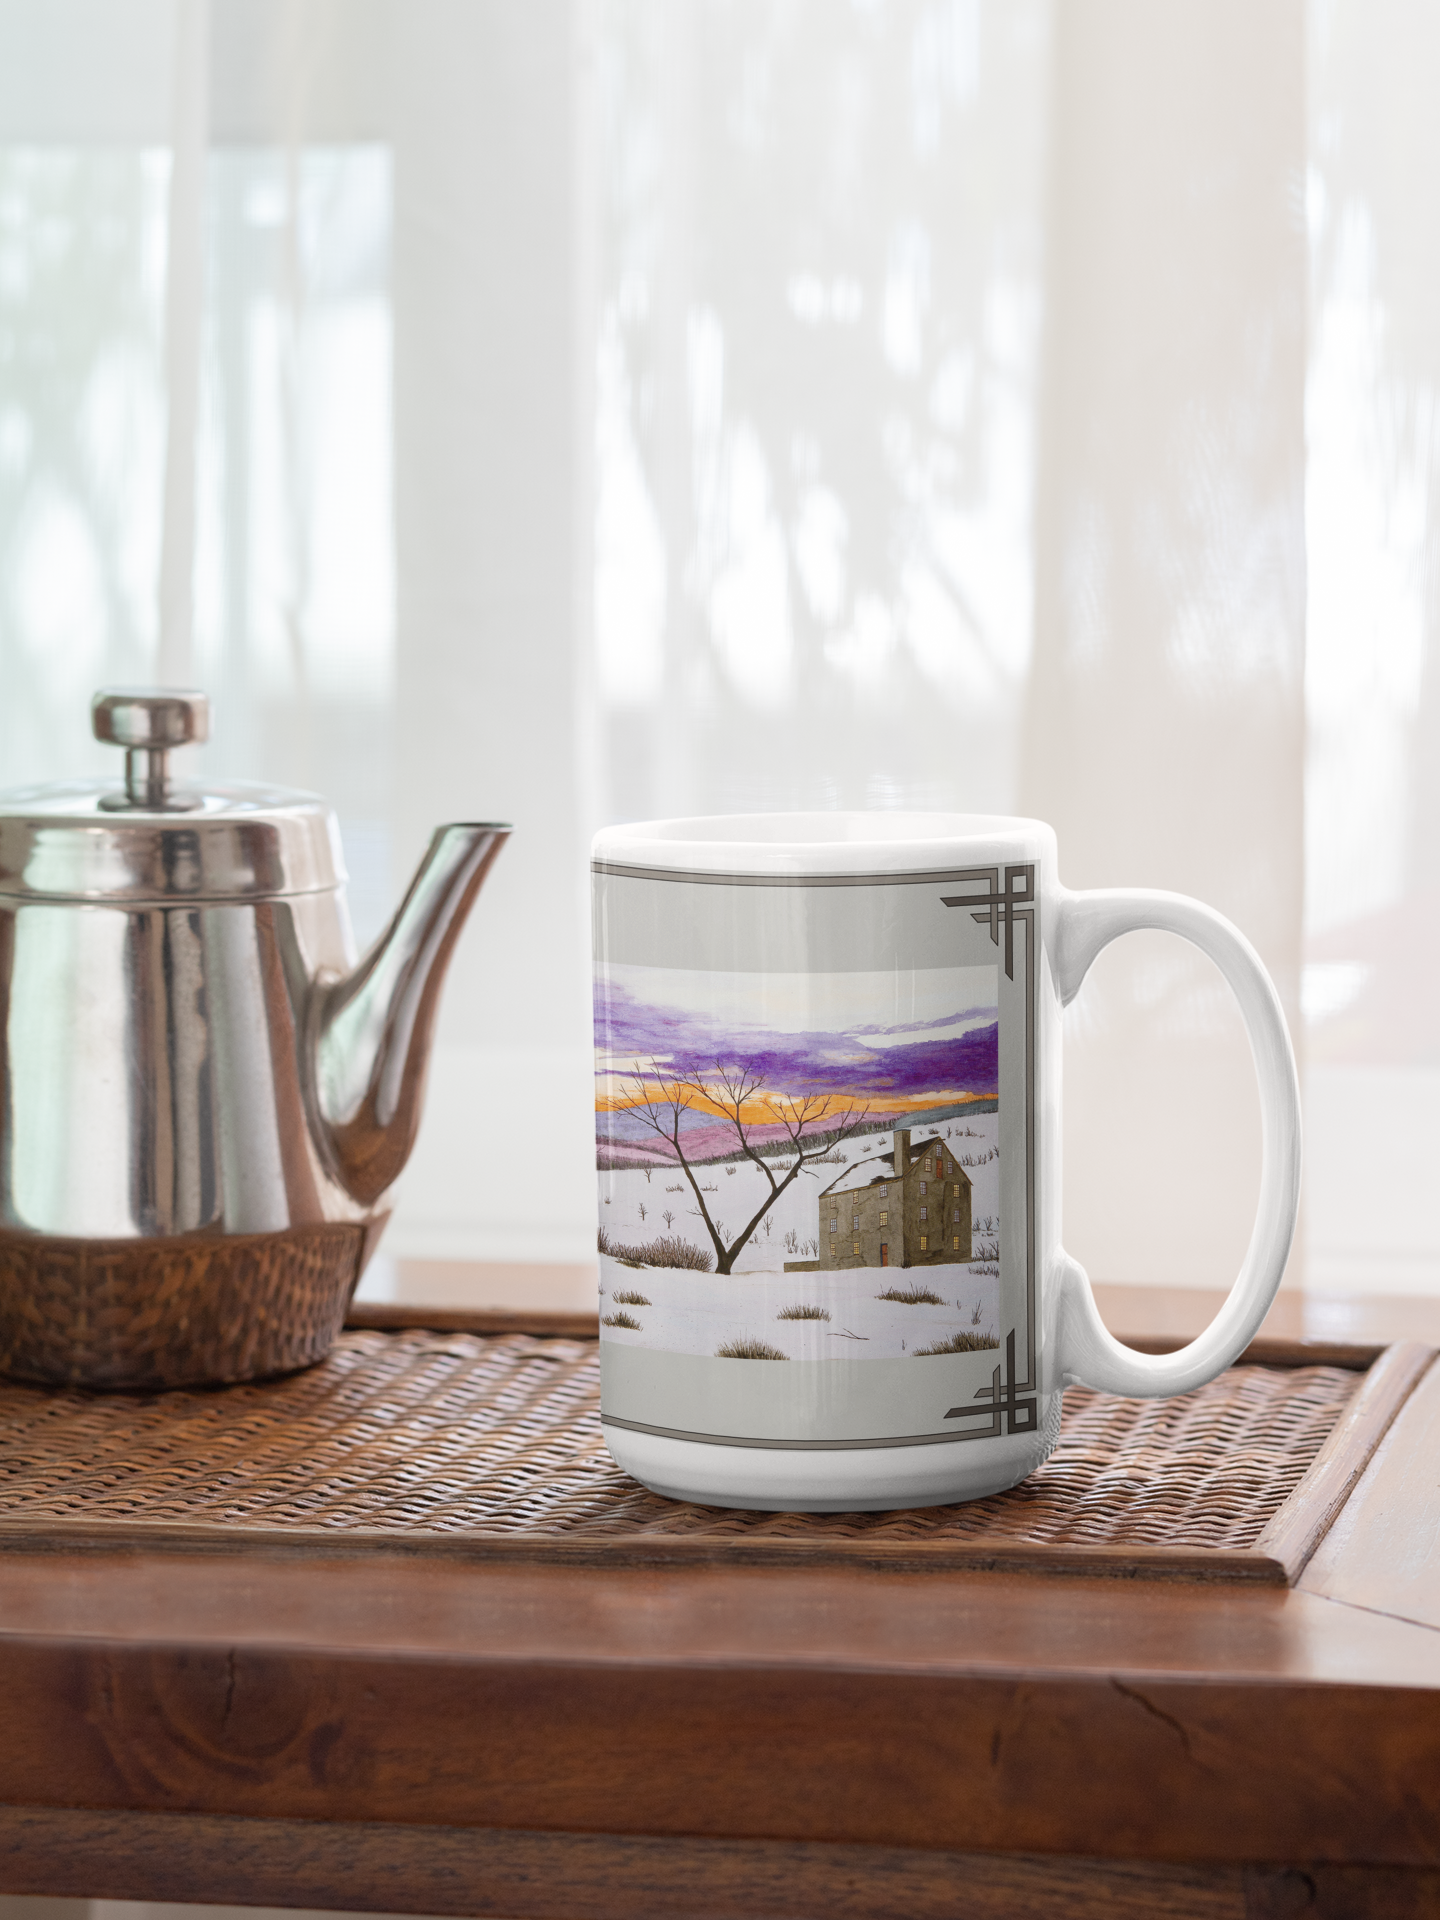 At sunset, this old farmhouse beckons us to come in from the snow and enjoy a mug of hot coffee, tea, or hot chocolate. In Winter, you'll appreciate being inside with your favorite hot beverage in this mug, and on a hot Sumer day, this charming snow scene will be a refreshing sight!      The mug design is a reproduction of an original watercolor by Lee M. Buchanan and has the image on the front and back of the mug.